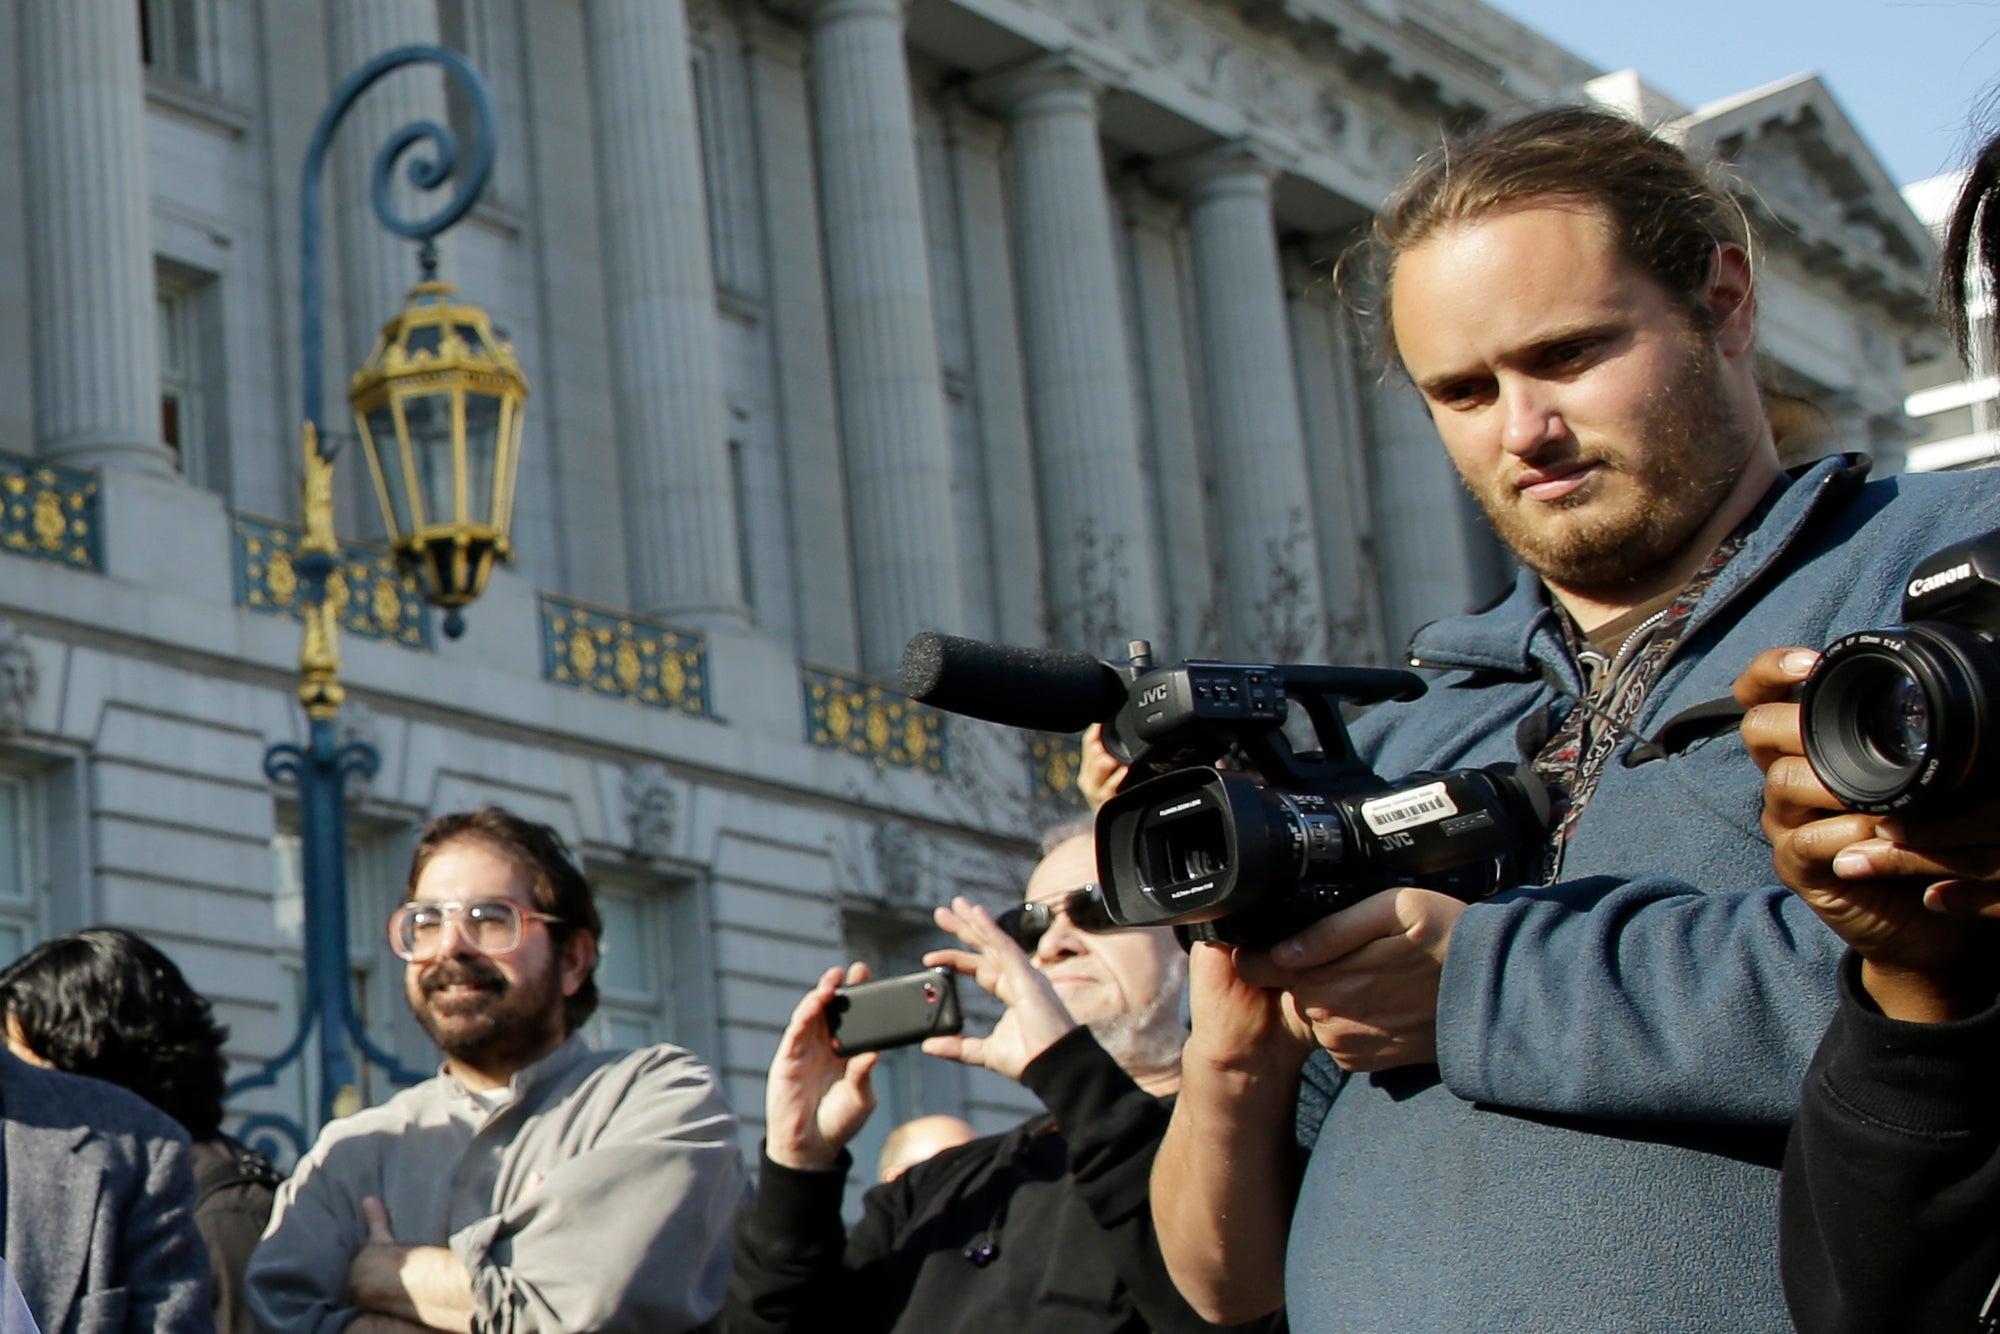 David DePape, right, records the nude wedding of Gypsy Taub outside City Hall on Dec. 19, 2013, in San Francisco